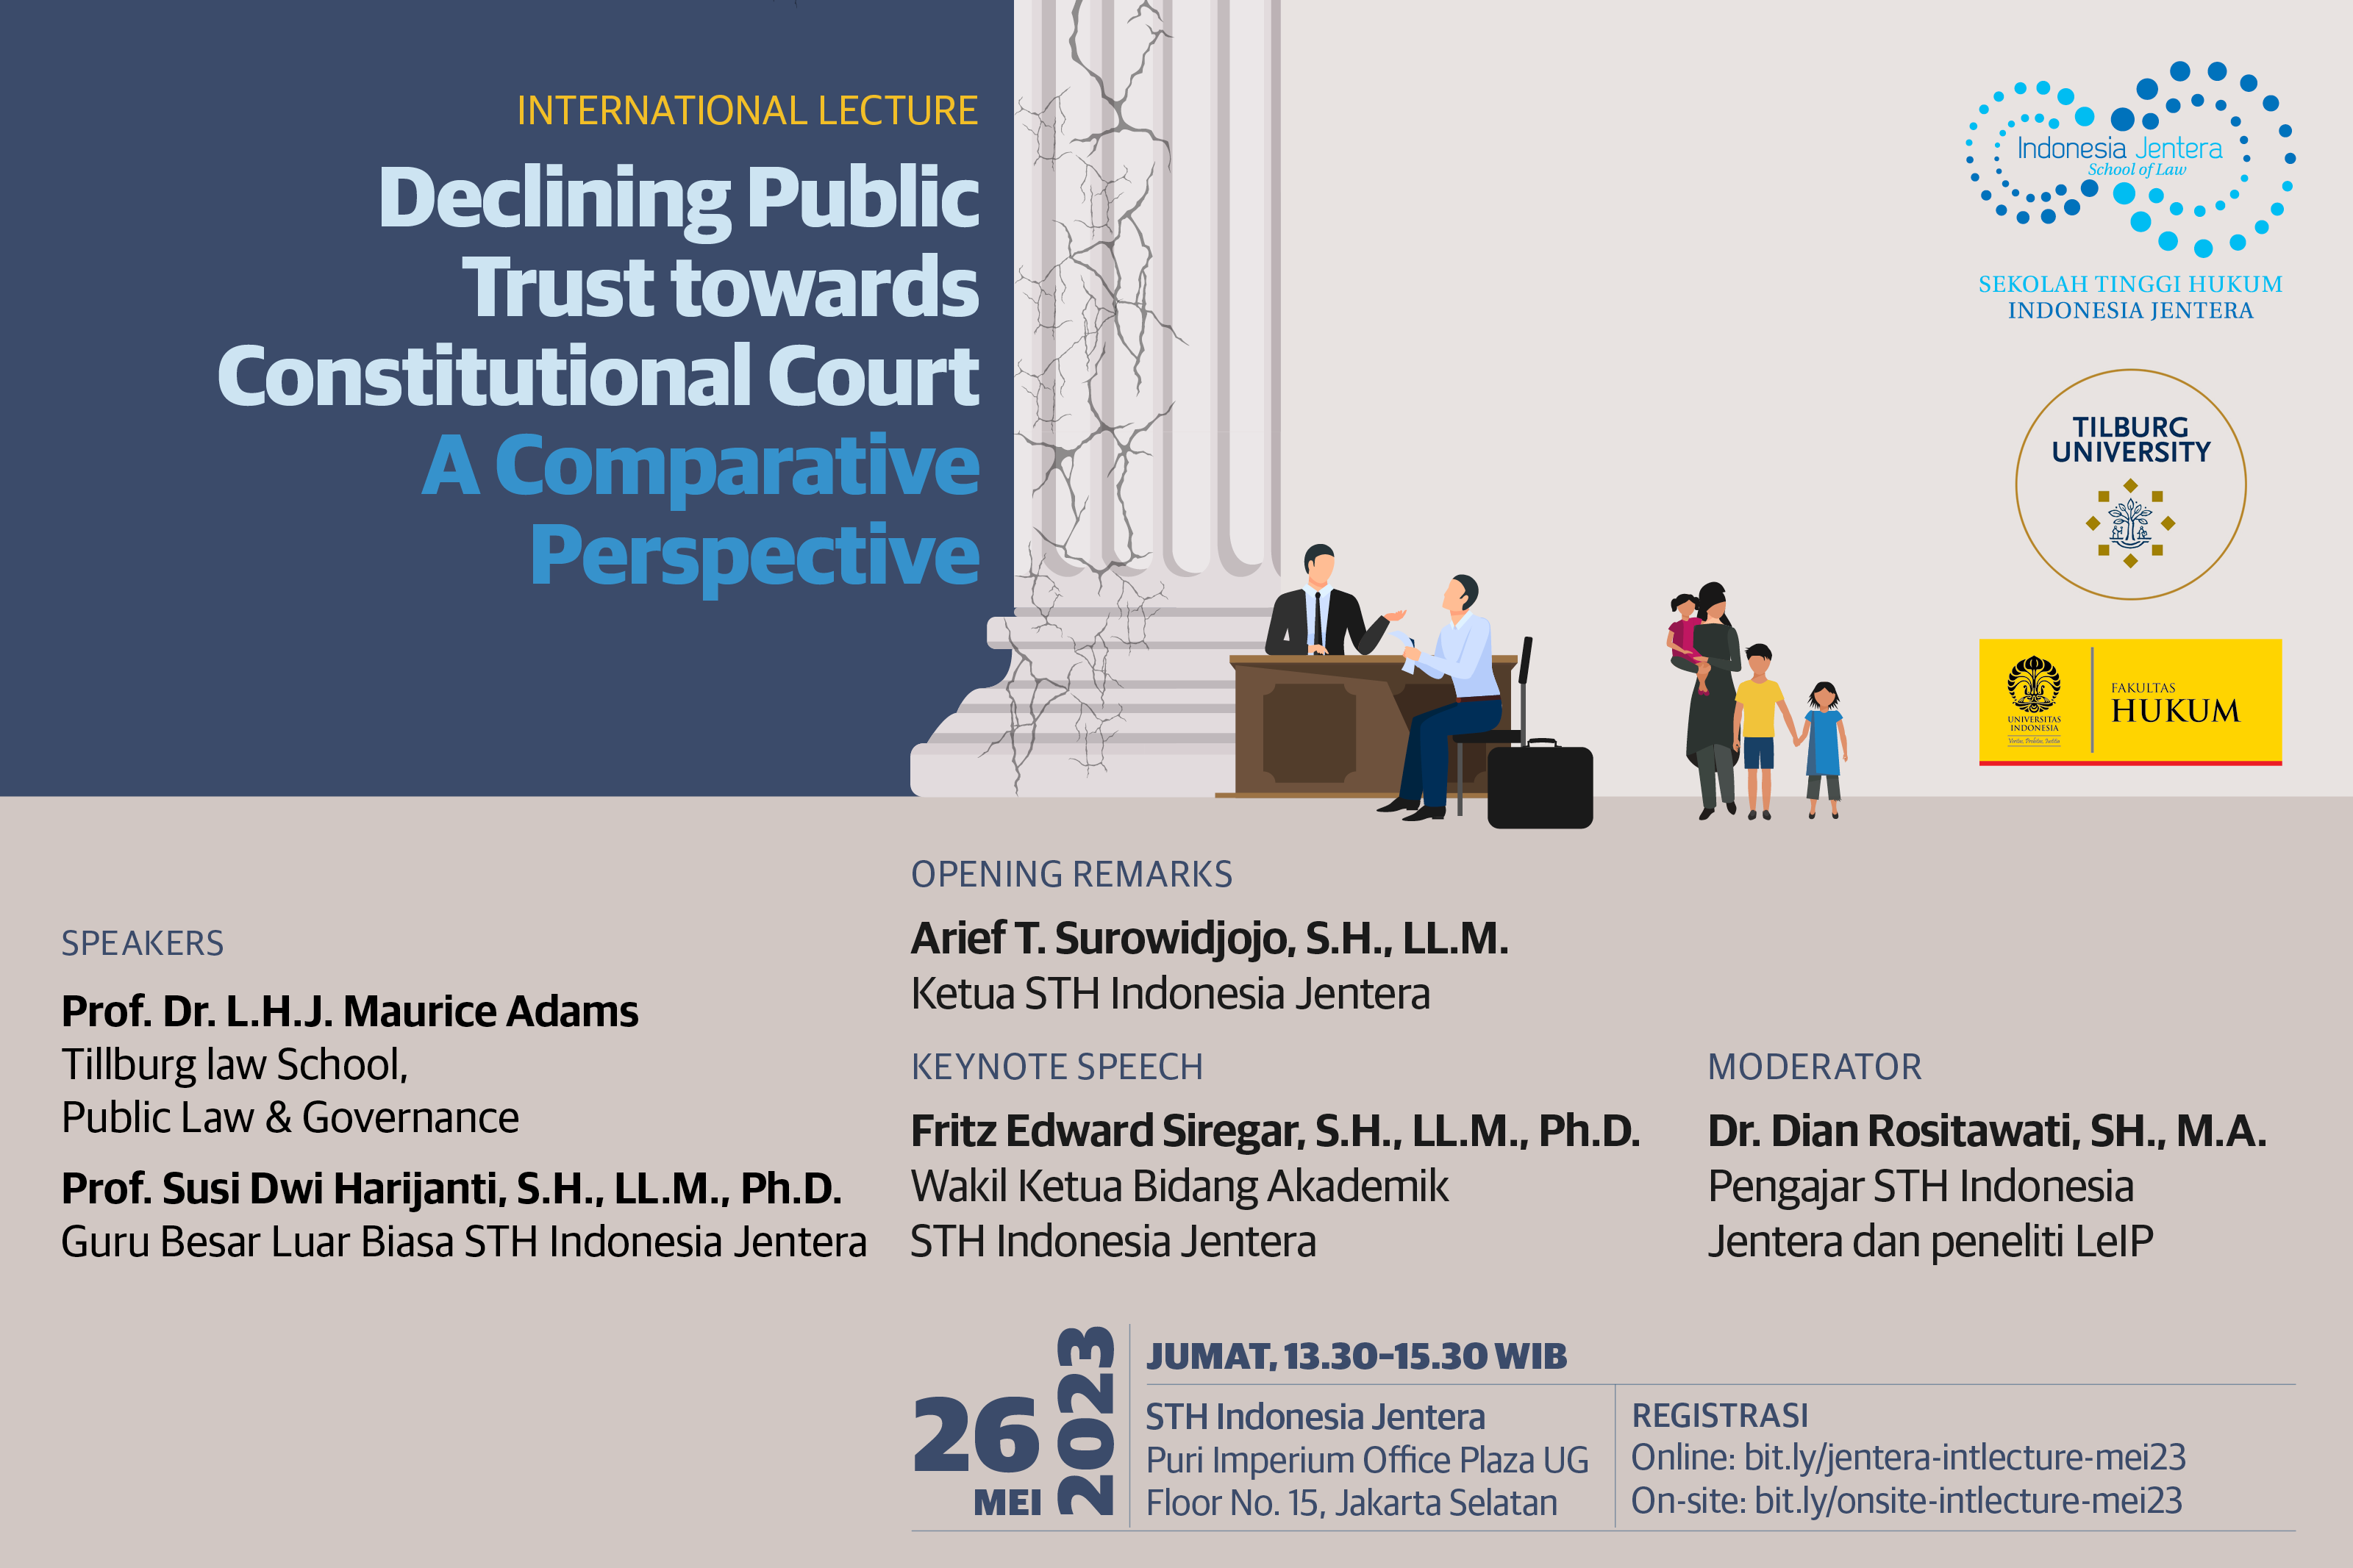 International Lecture Declining Public Trust towards Constitutional Court: A Comparative Perspective